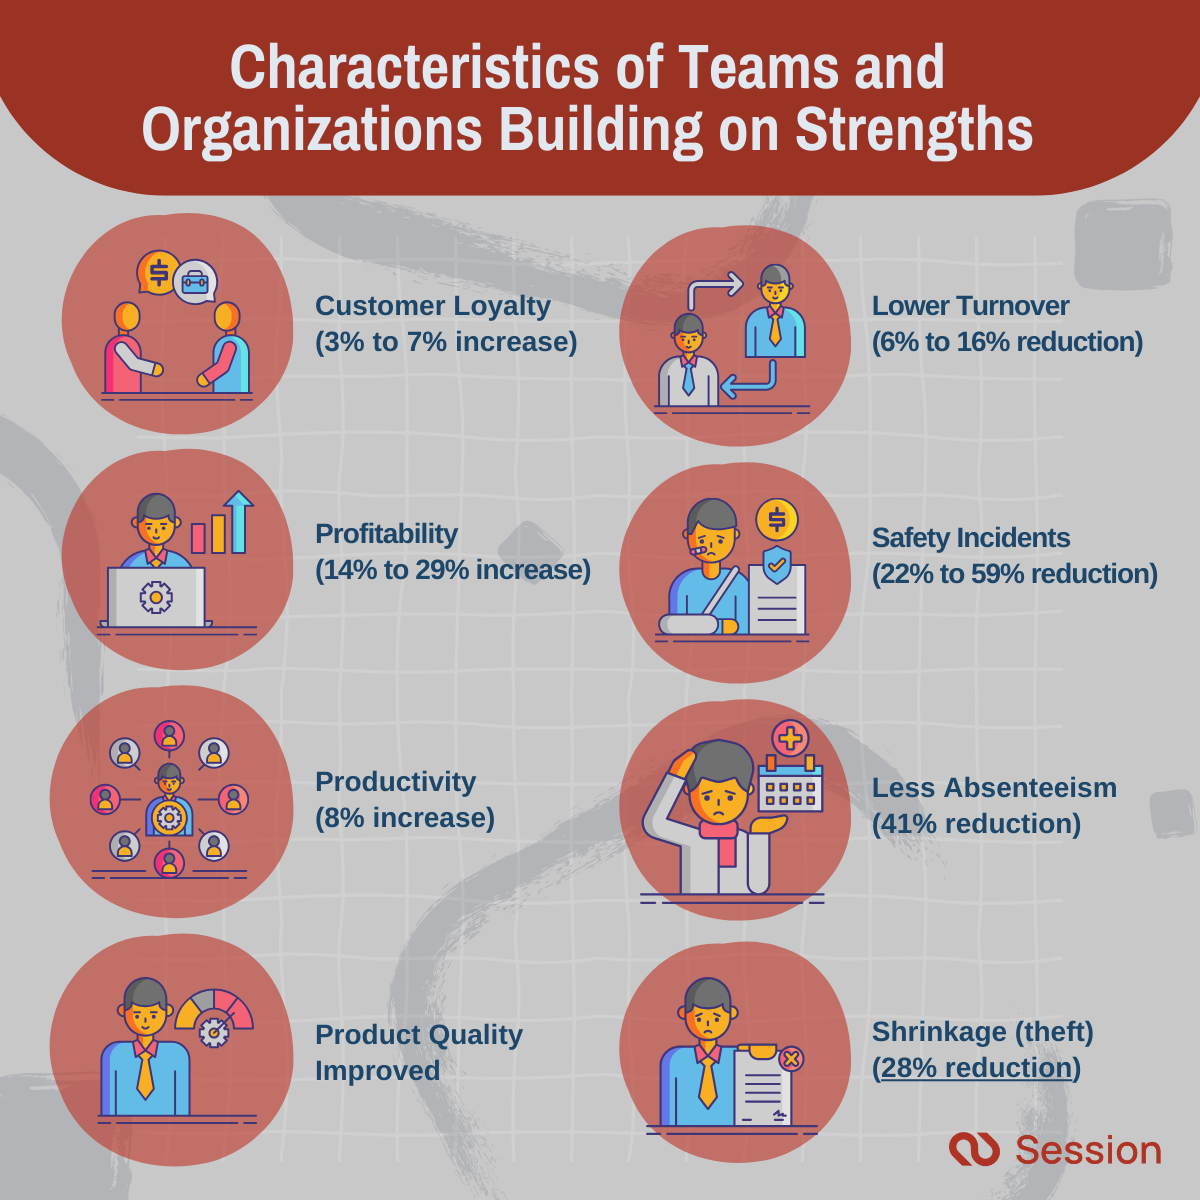 Illustration of 8 traits of Teams and Organizations Building on Strengths